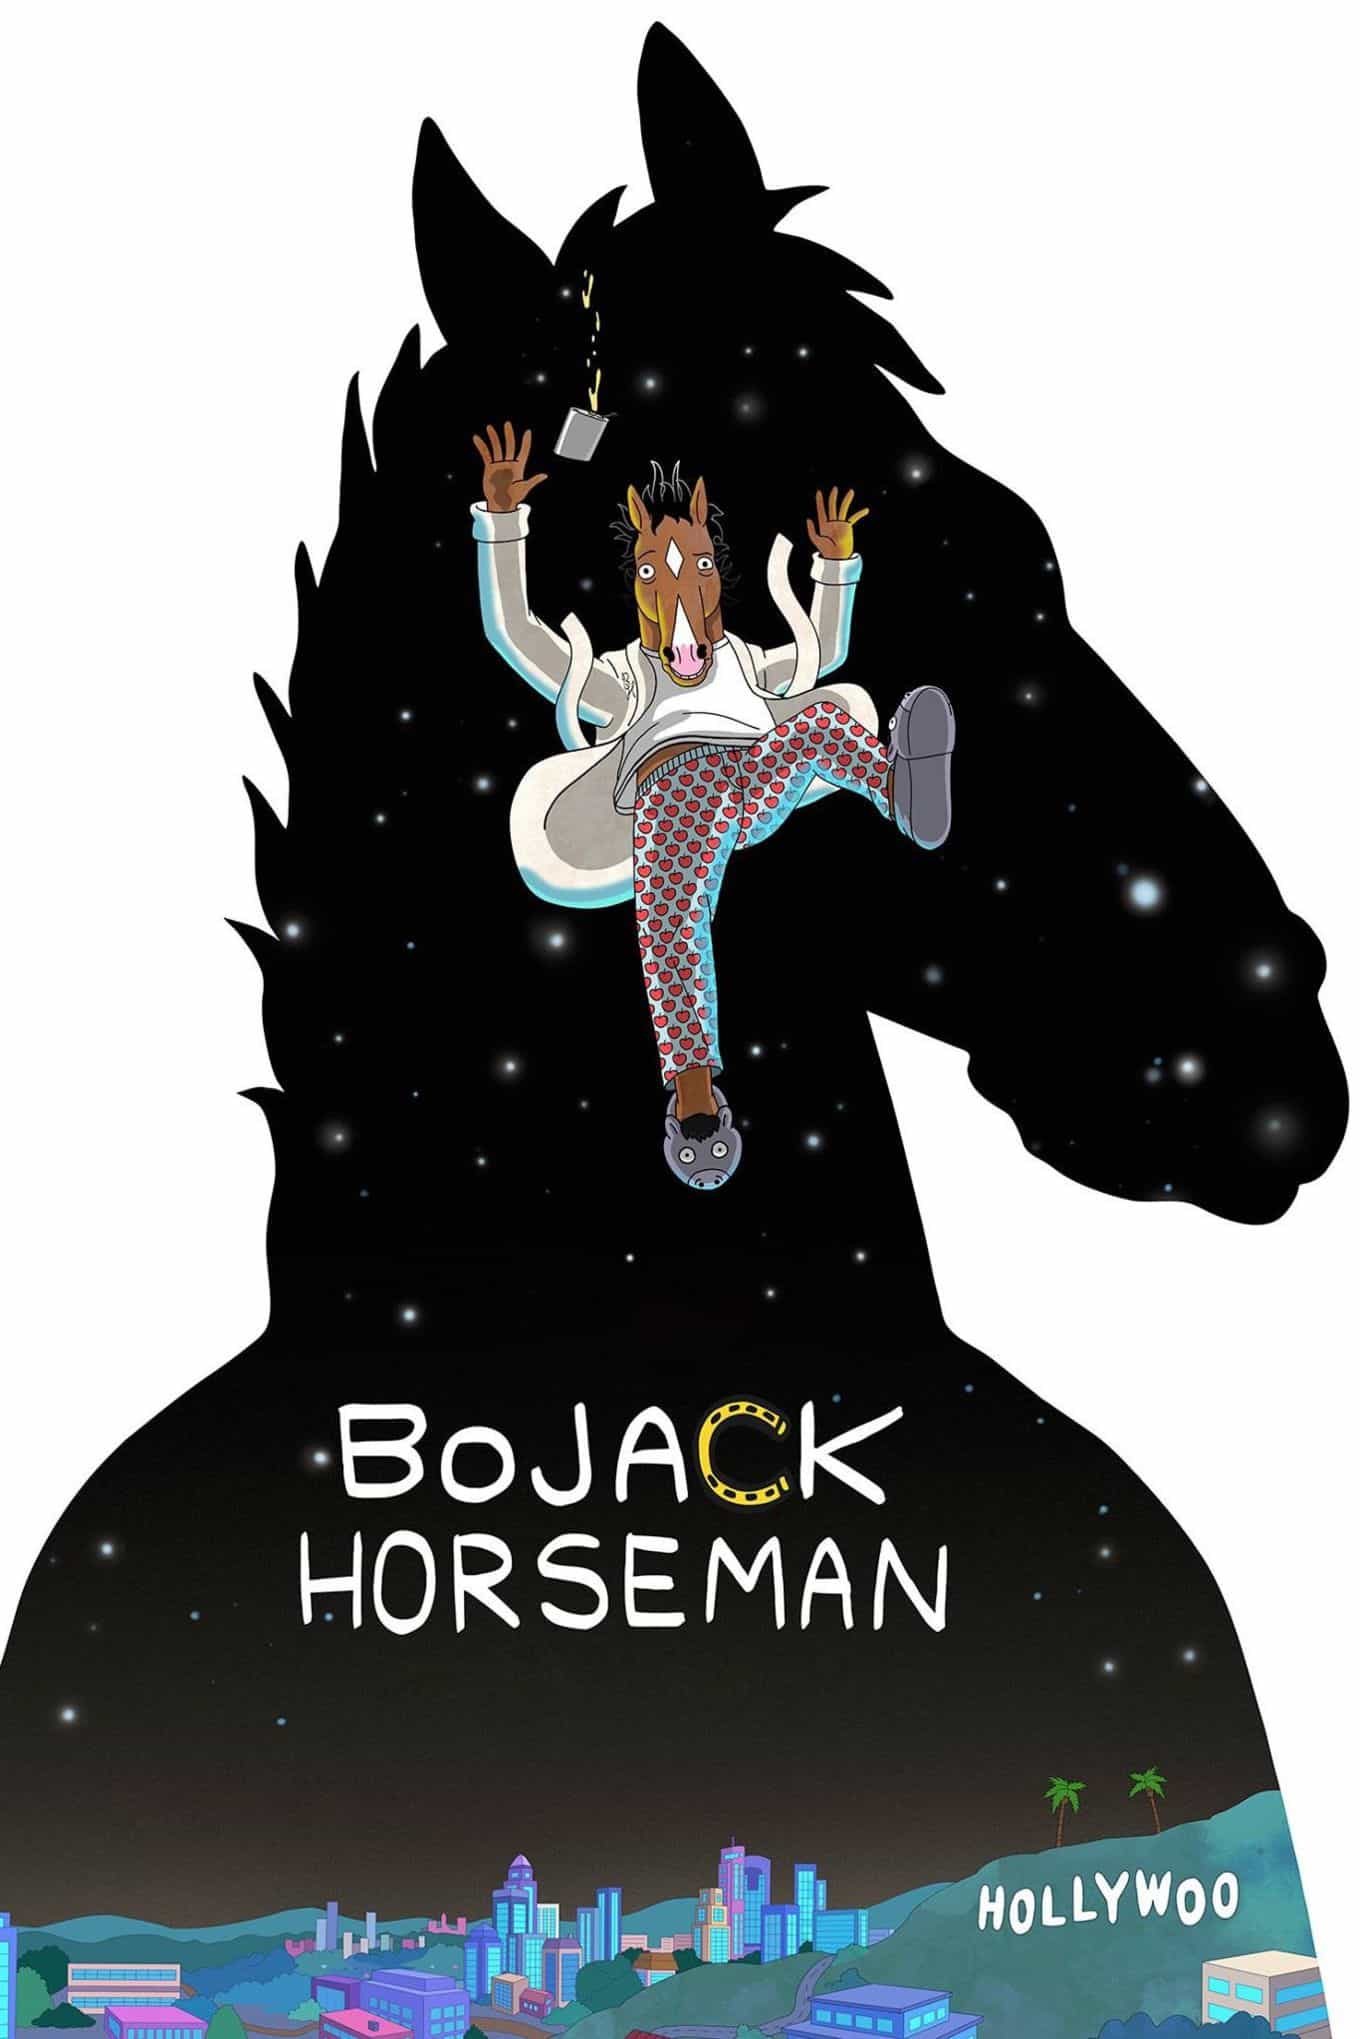 10 Thoughts on Bojack Horseman – After the Party | Inside Pulse